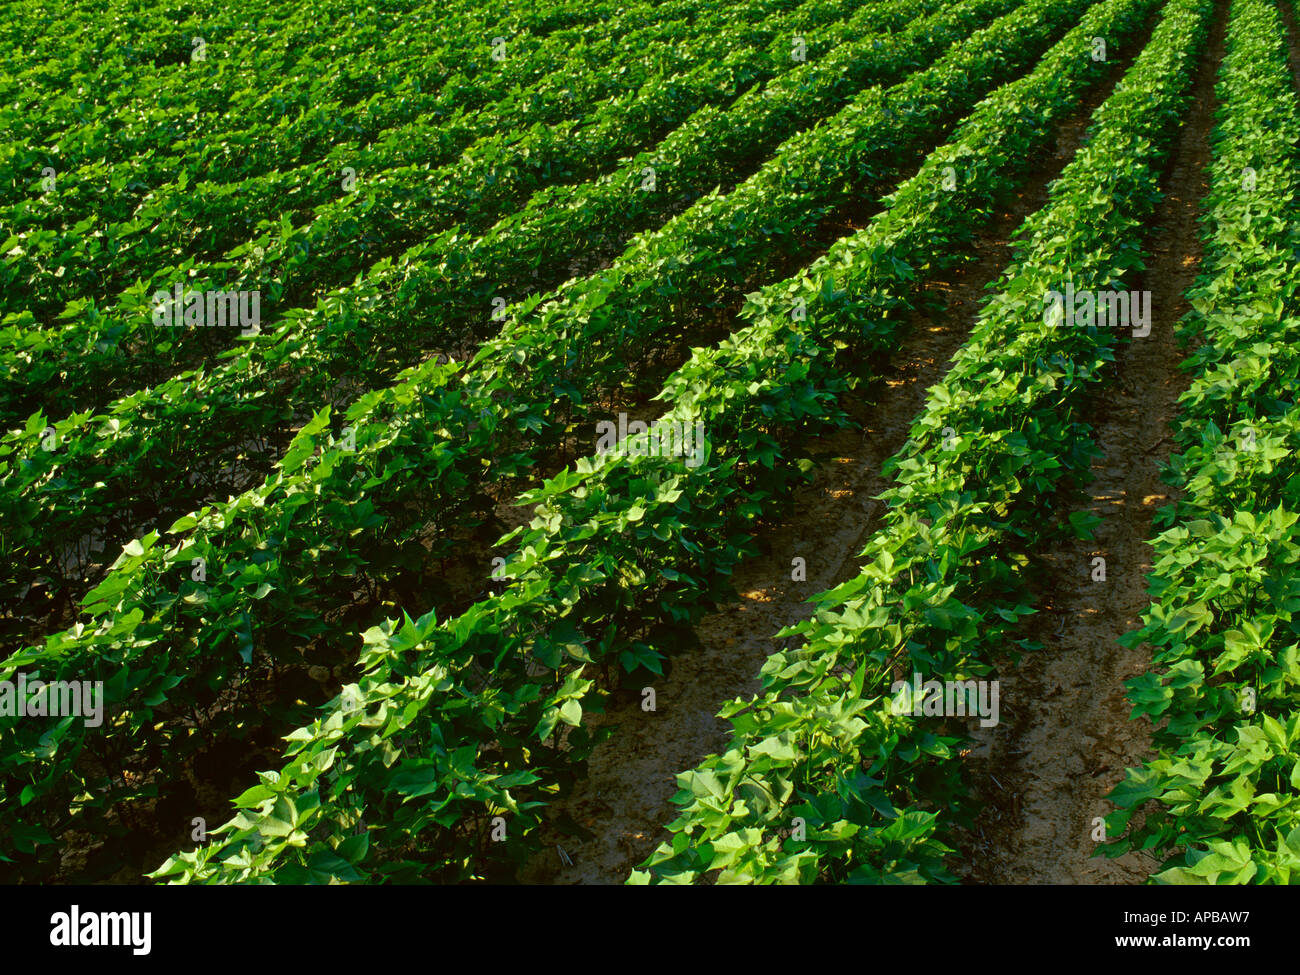 Agriculture - Rows of reduced tillage mid growth cotton just prior to bloom stage / Mississippi, USA. Stock Photo